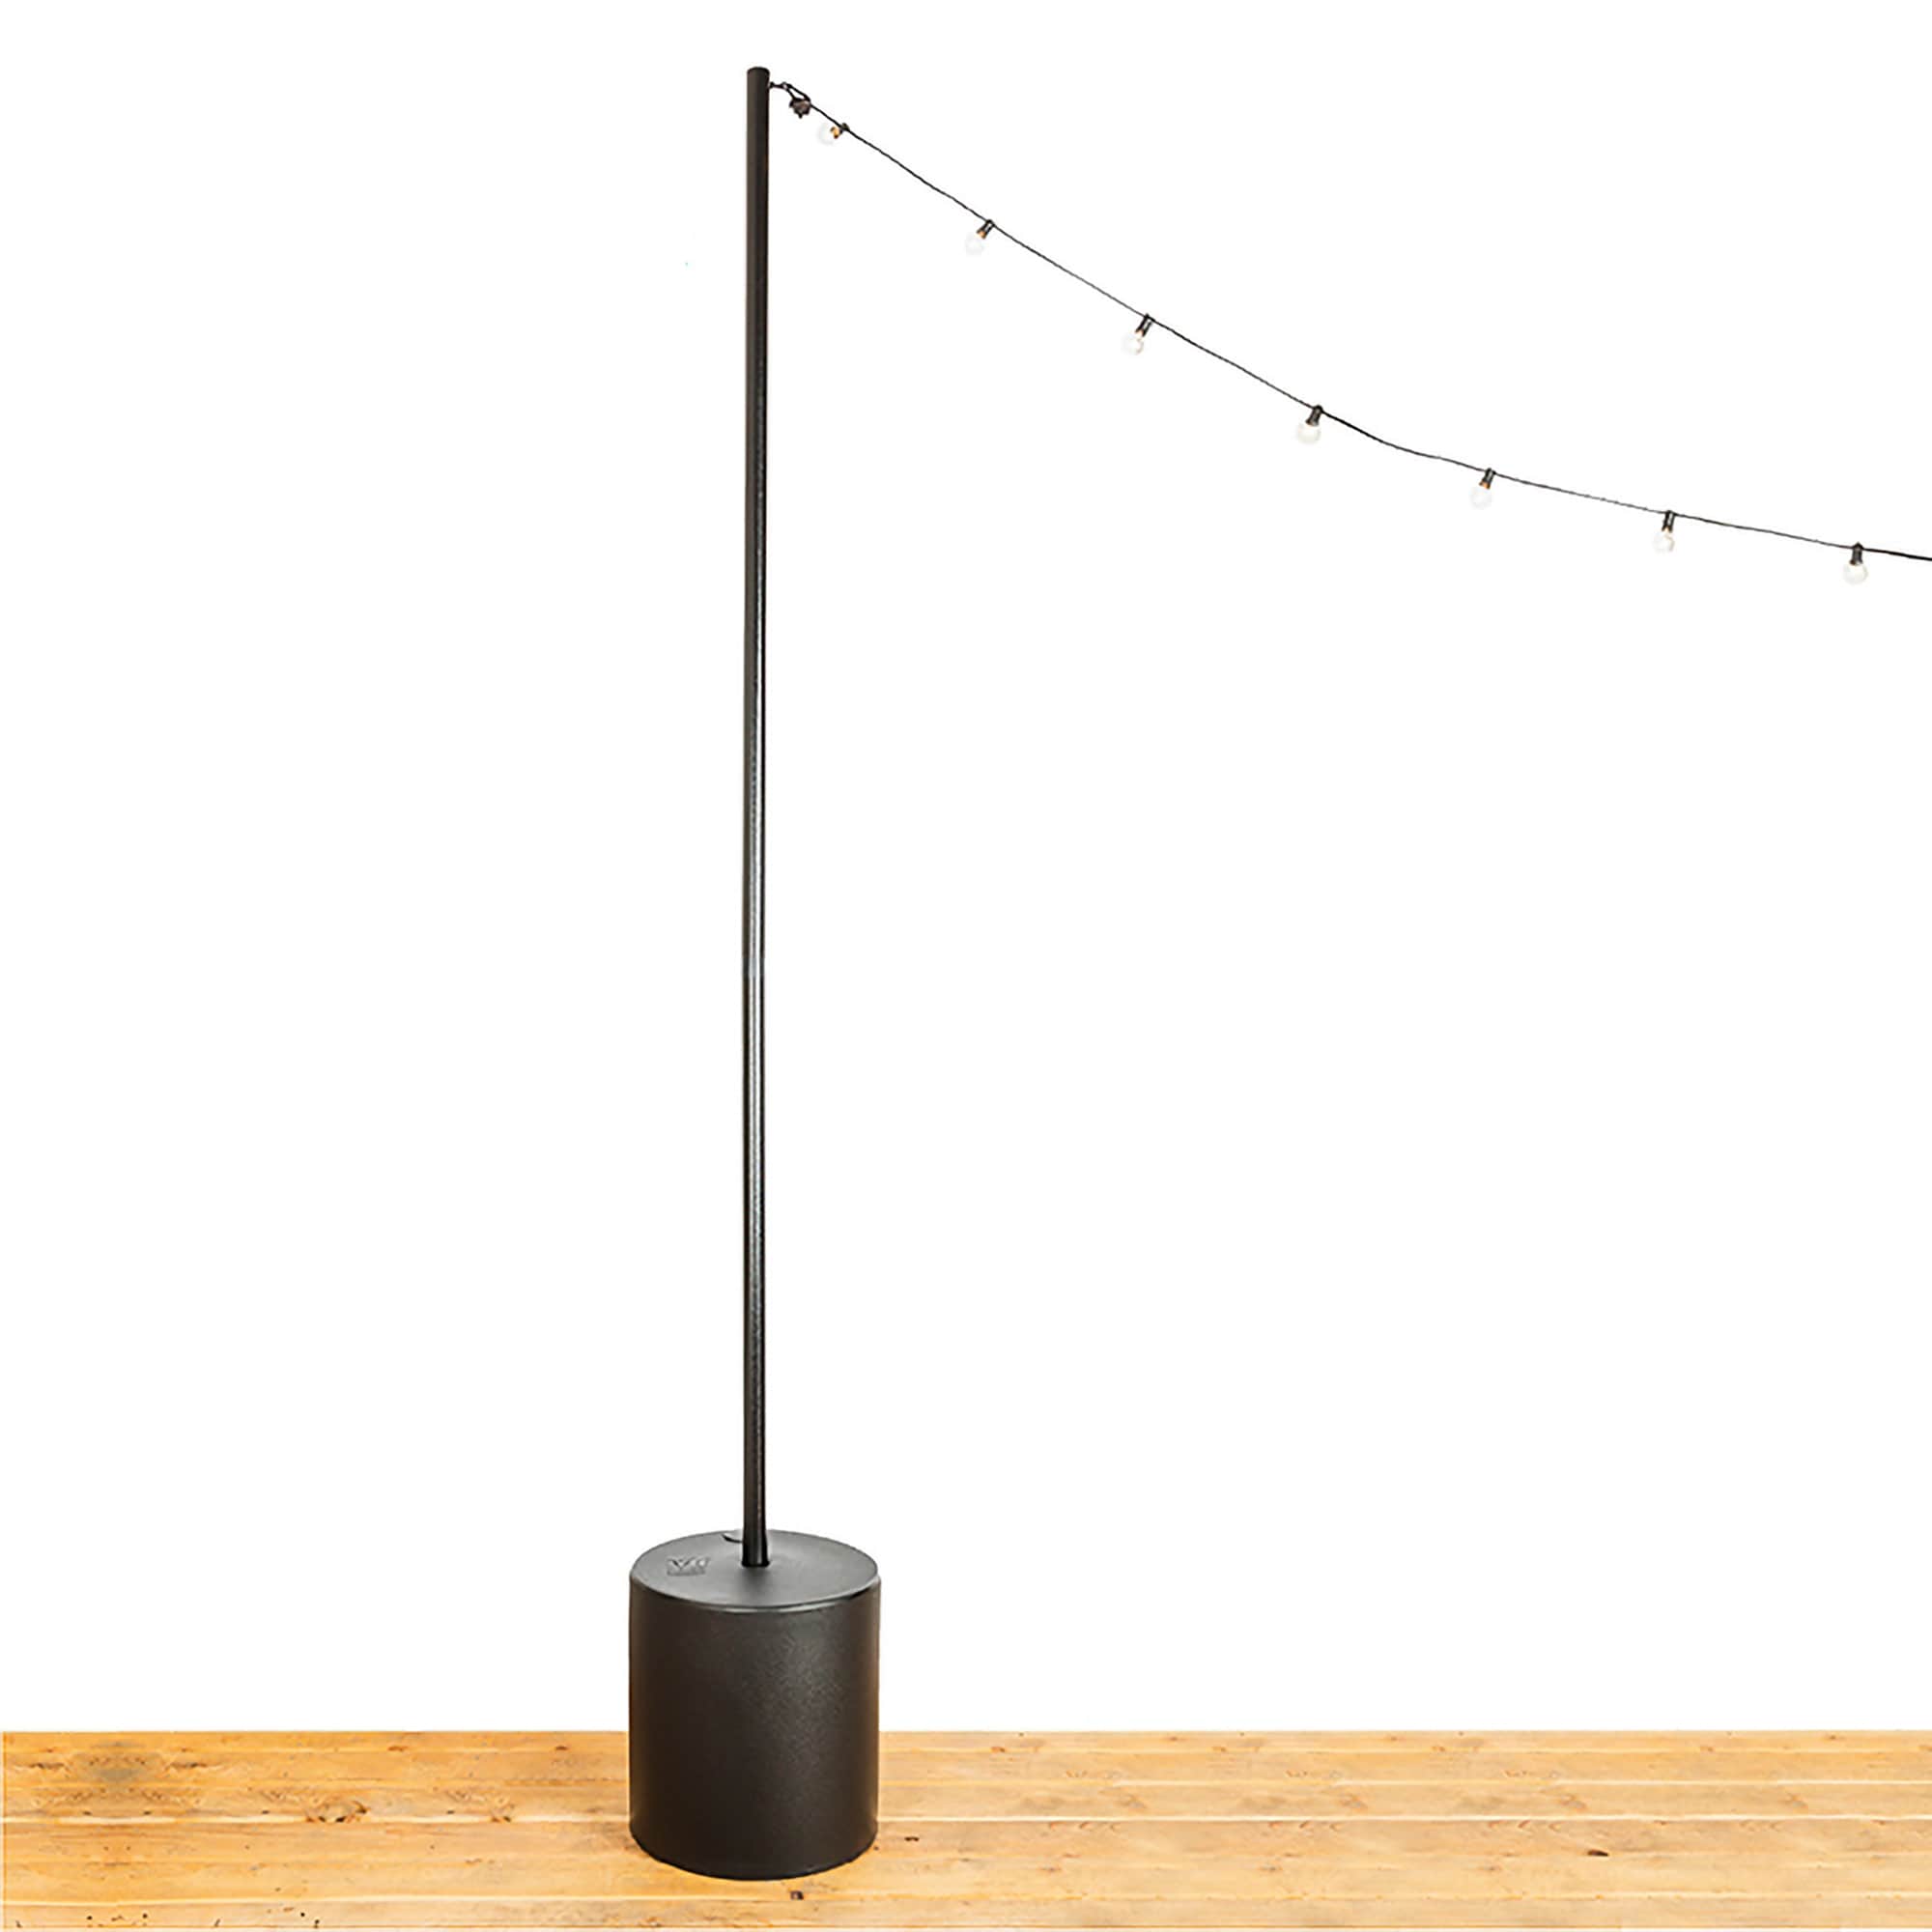 9.5' Heavy-Duty String Light Pole Stand with Freestanding Tank Base for Grass, Patio, Events